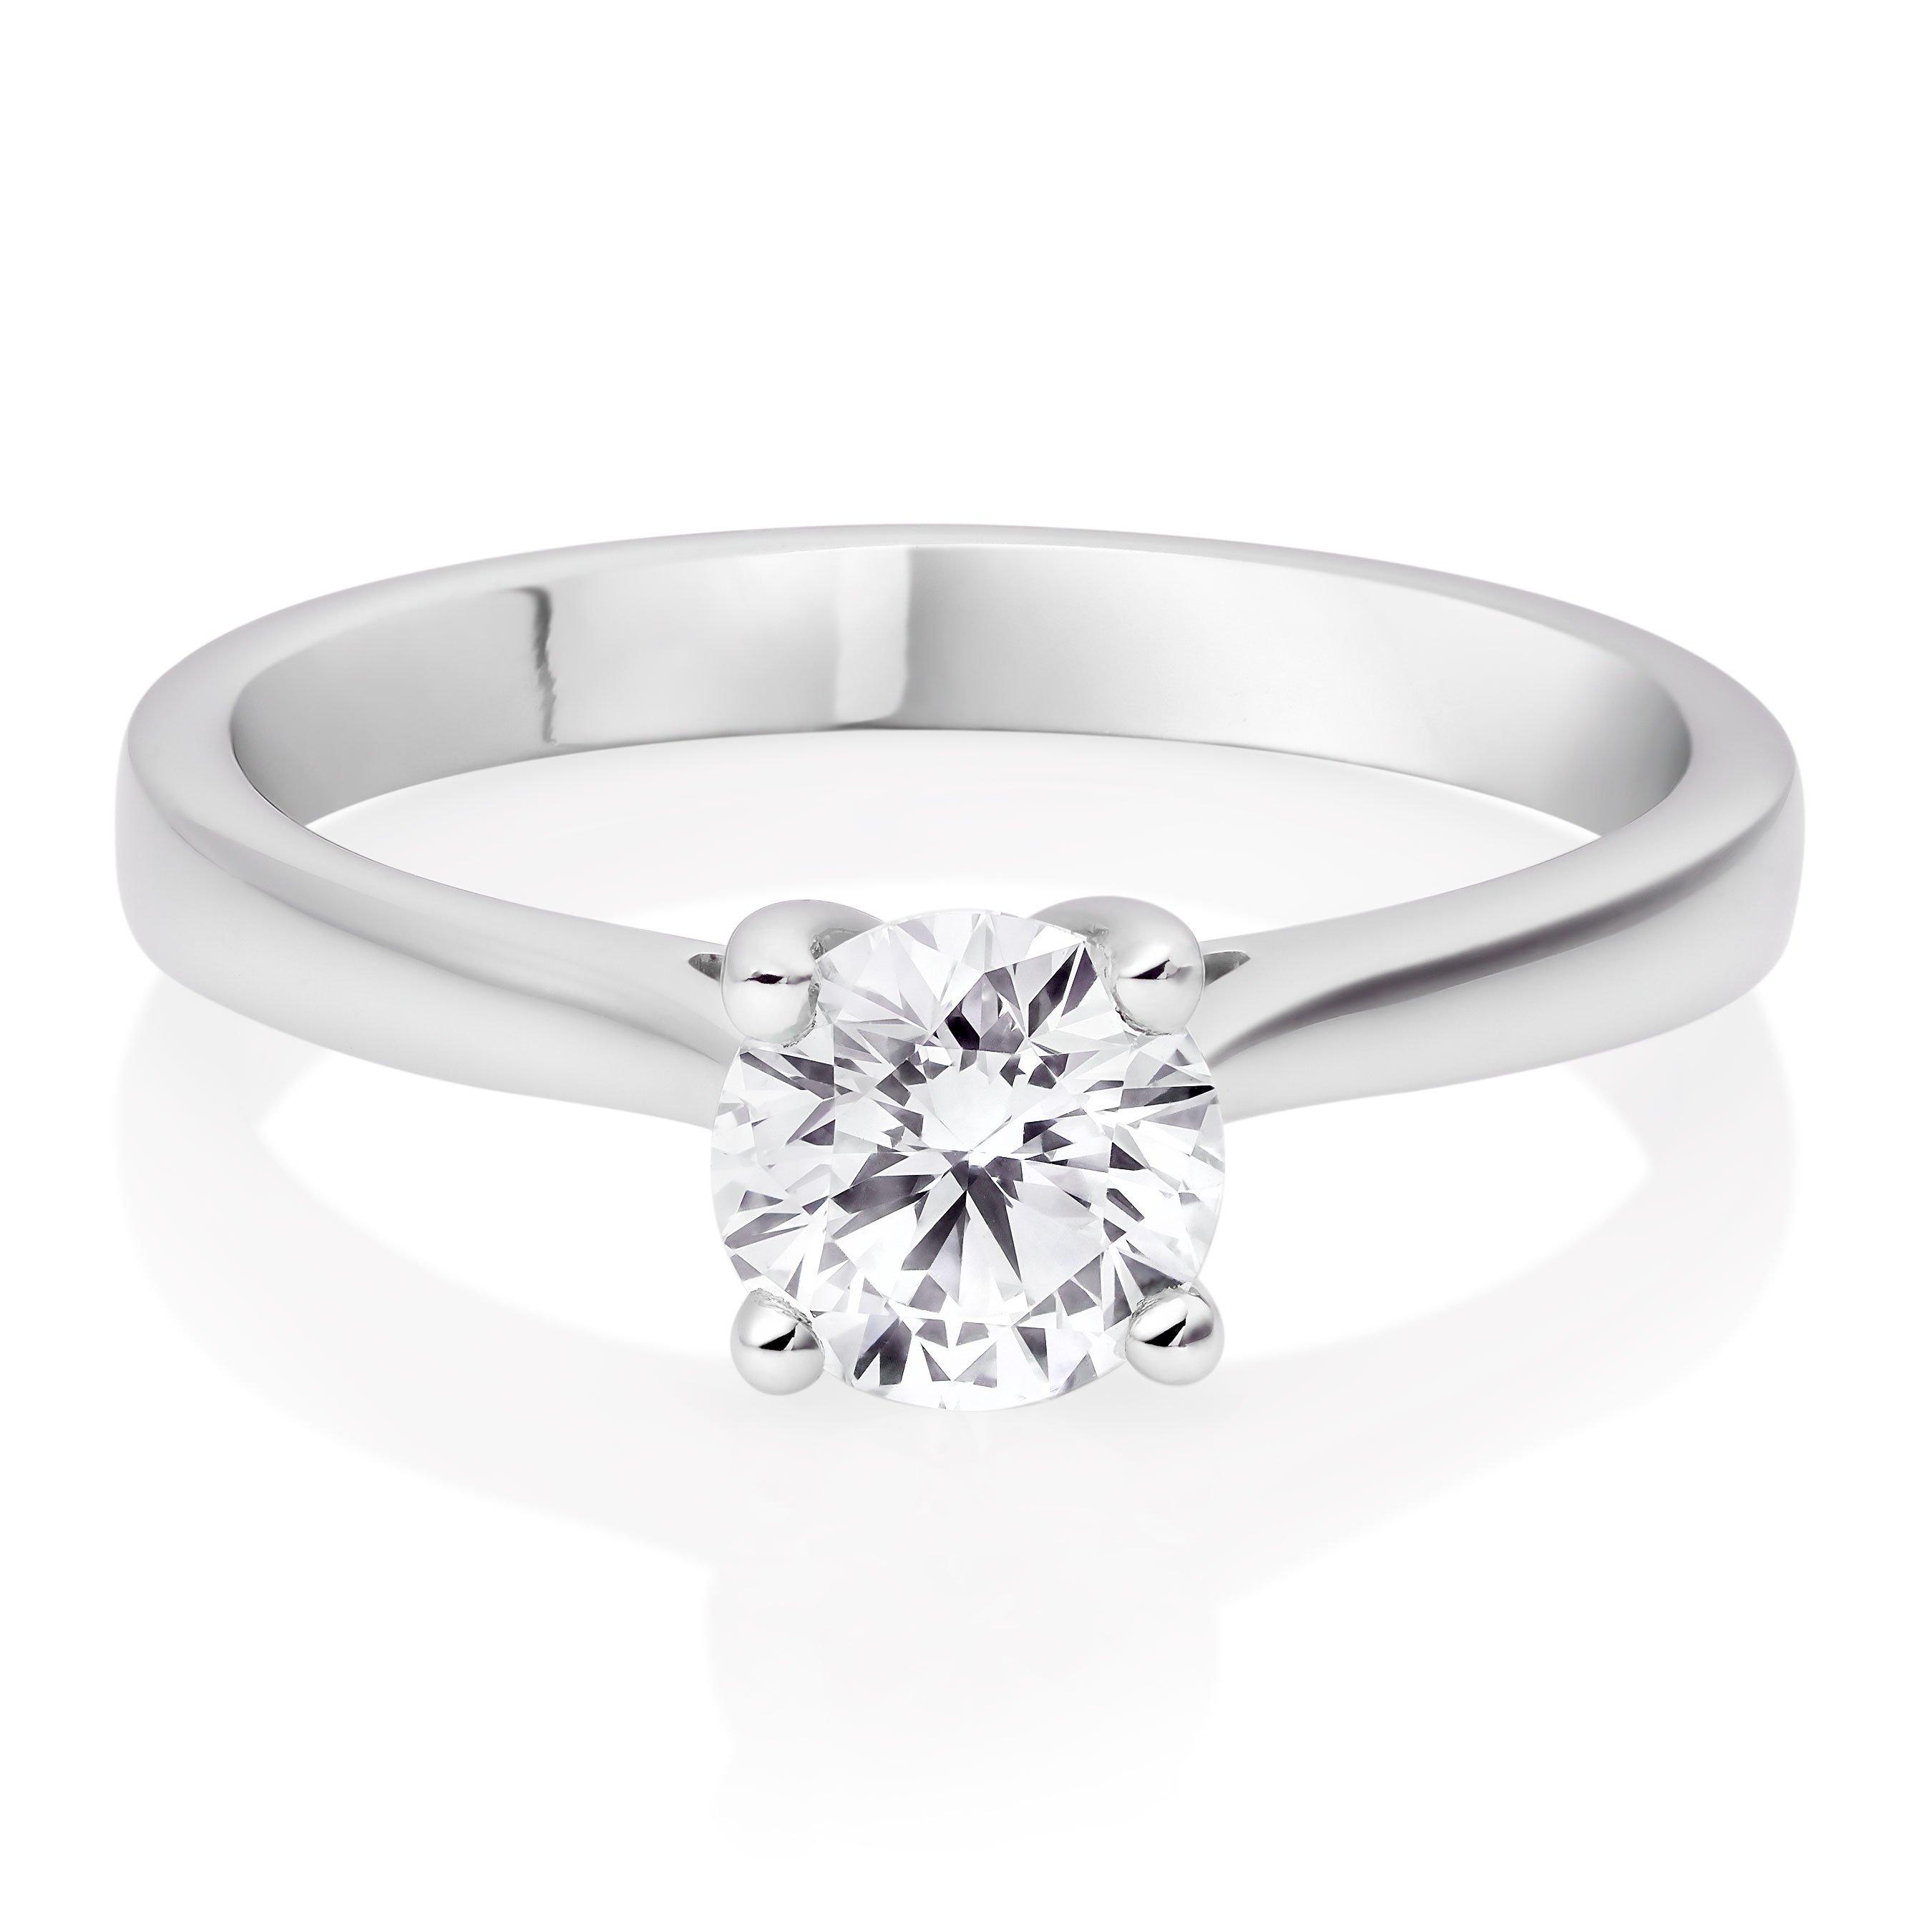 Once Platinum Diamond Solitaire Ring | 0105436 | Beaverbrooks the Jewellers